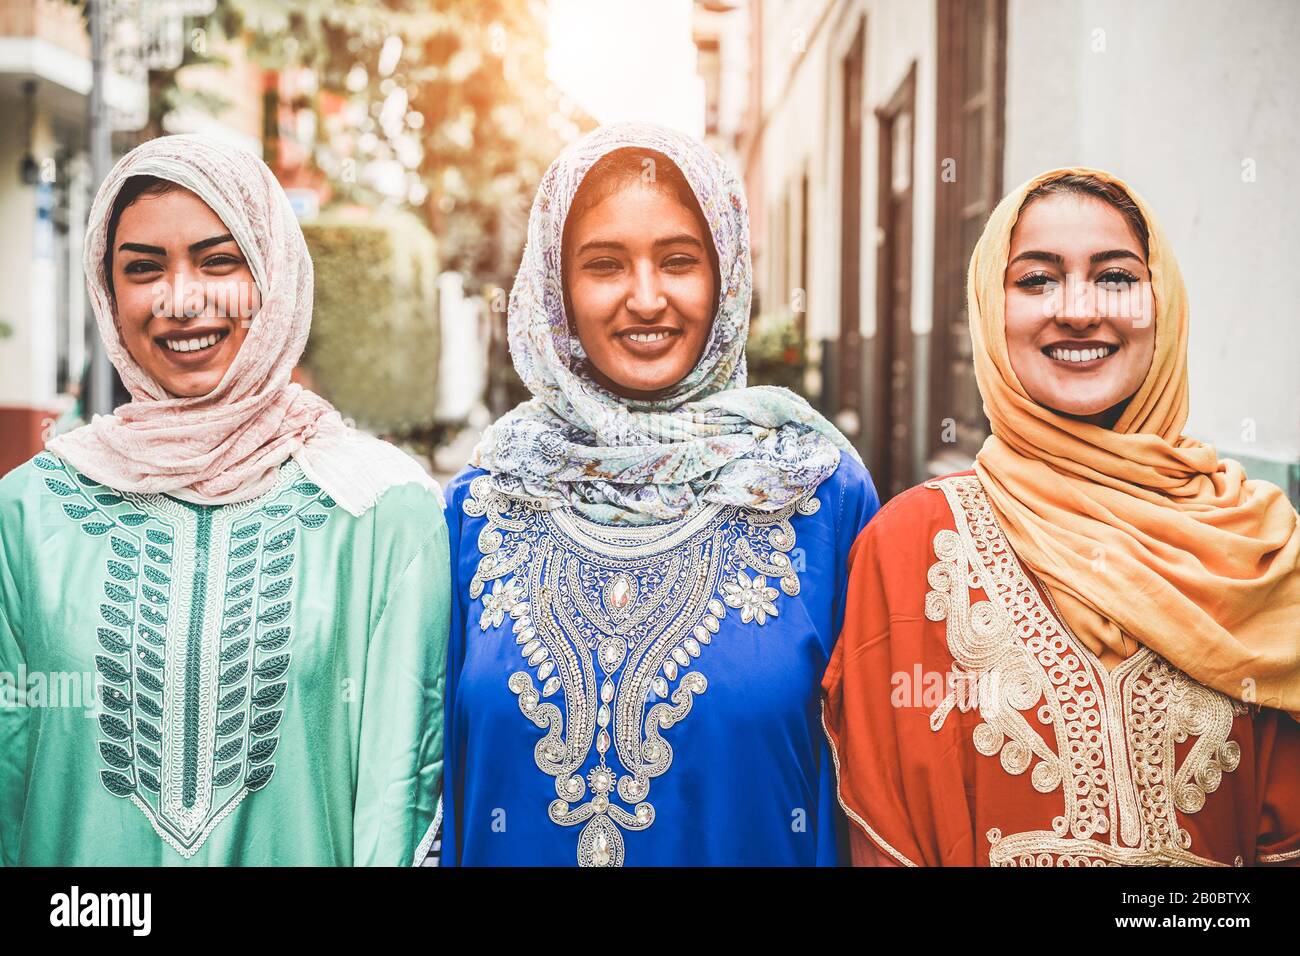 Portrait of arabian girls outdoor in city street - Young islamic women smiling on camera - Youth, friendship, religion and culture concept - Focus on Stock Photo